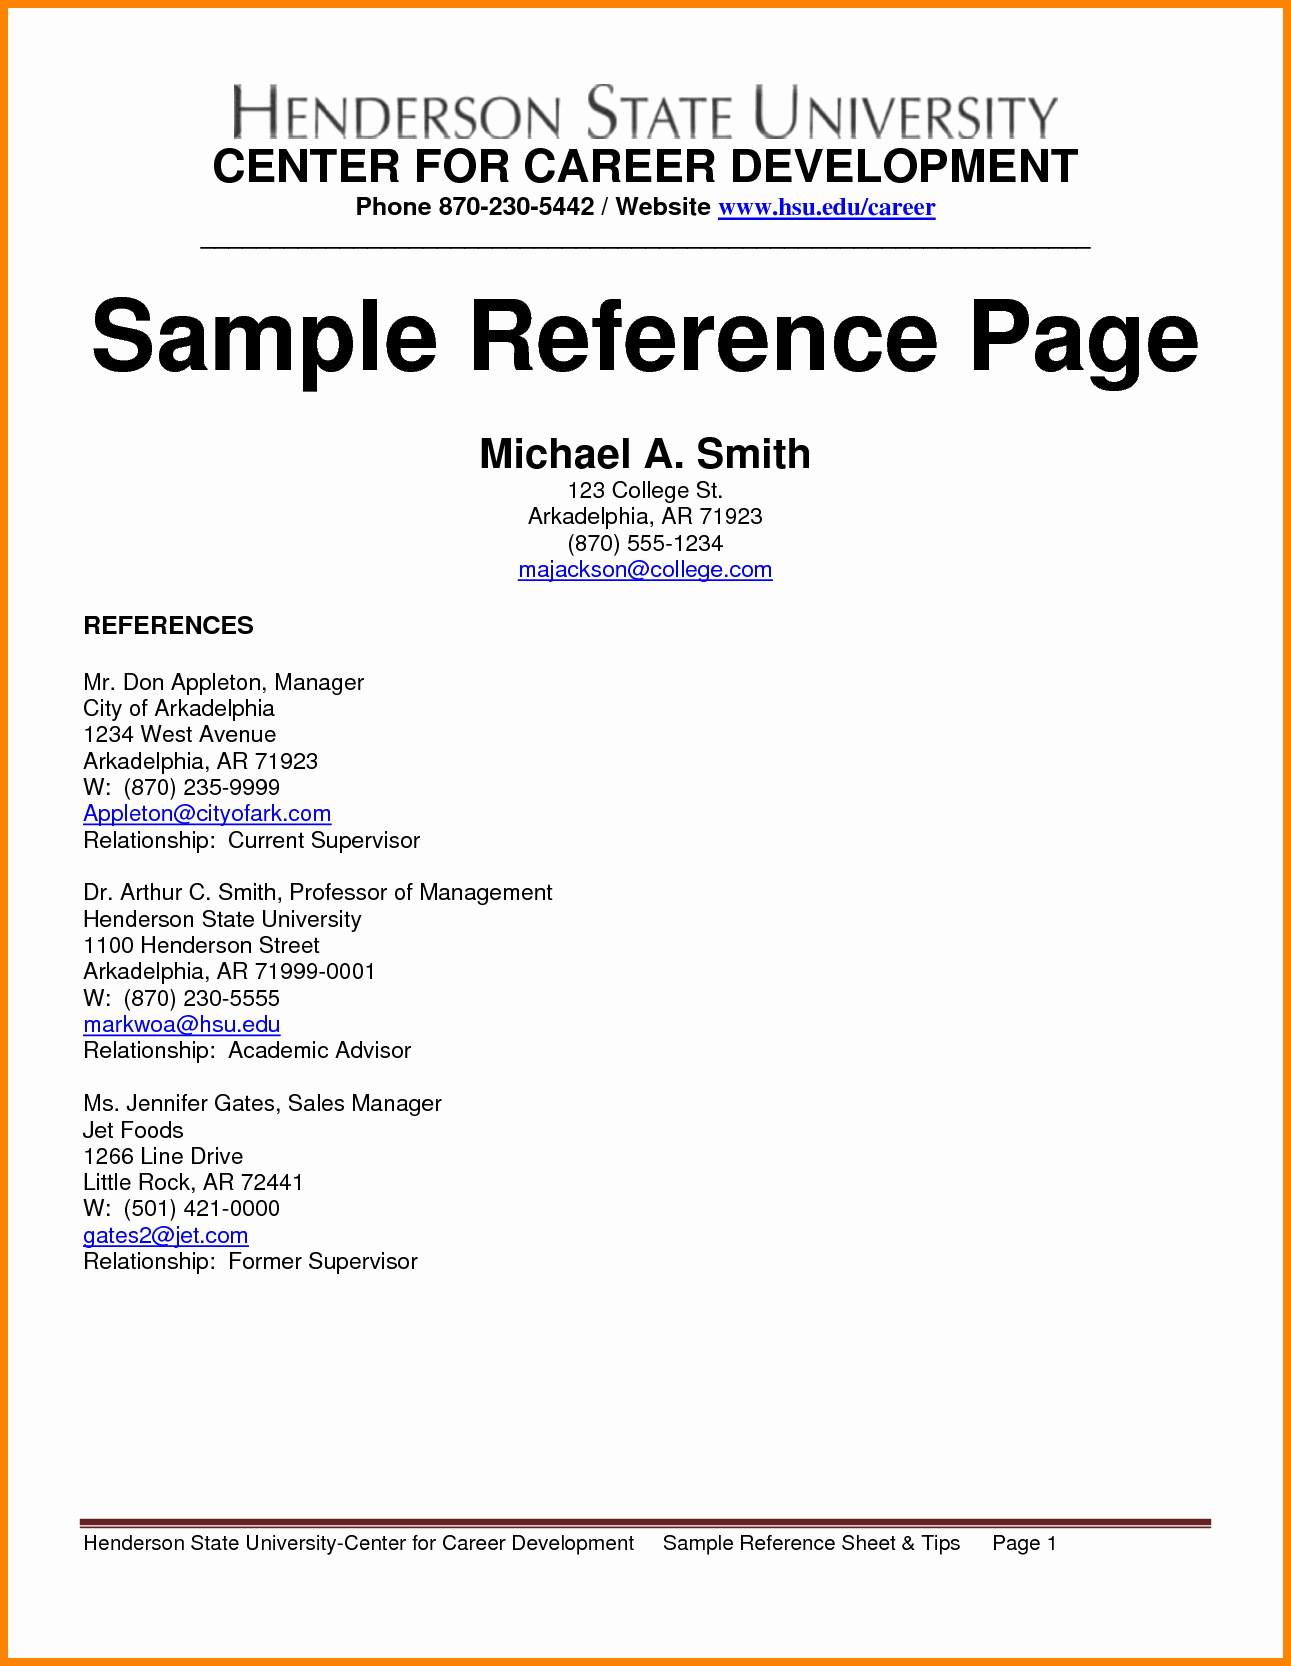 Sample Reference List for Jobs Awesome 7 Job Reference Sample